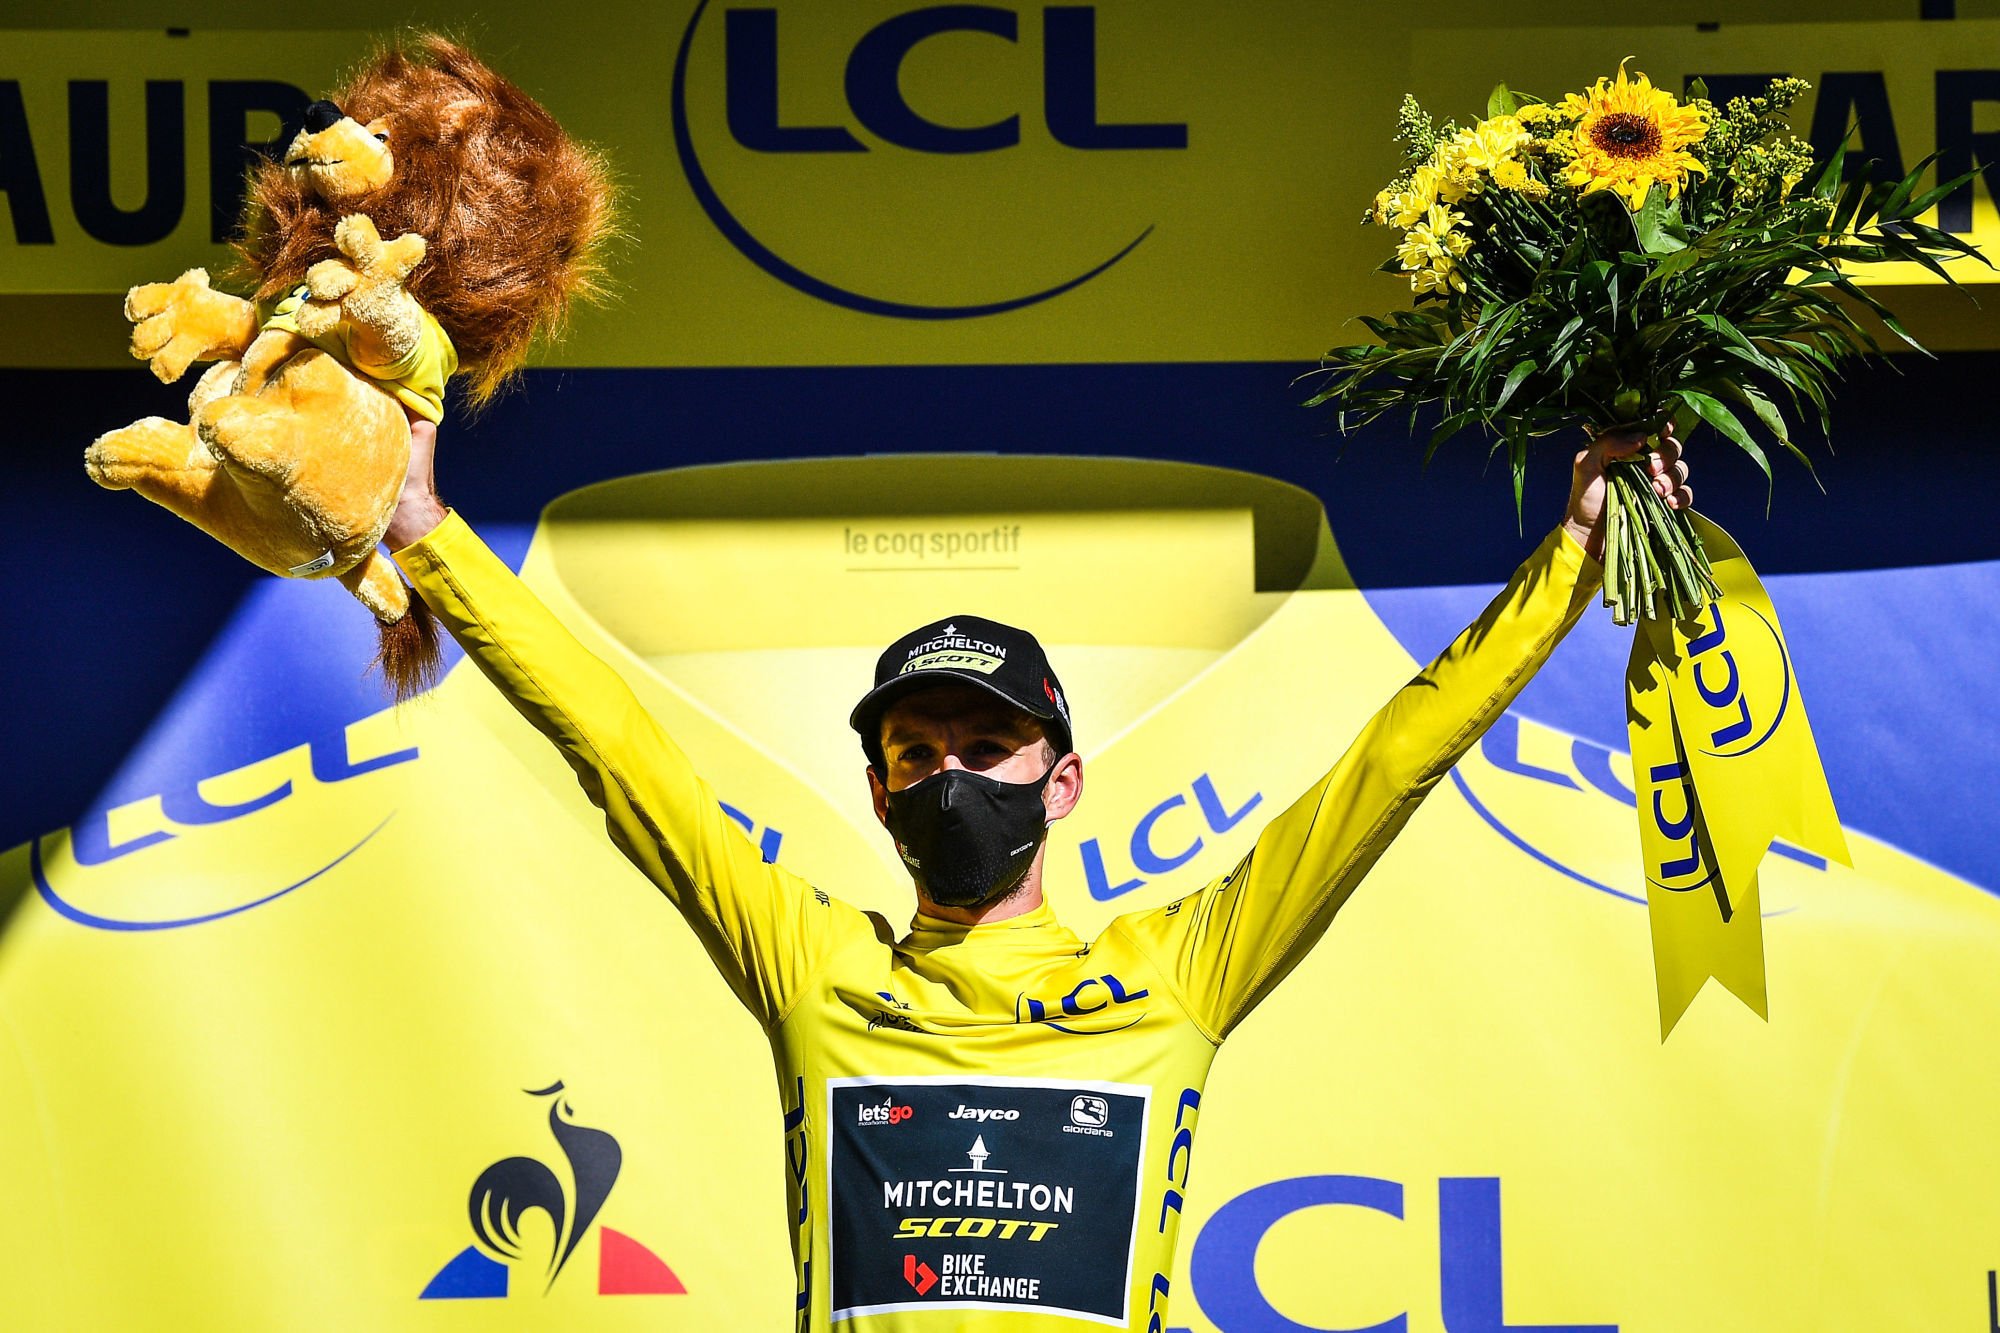 Adam Yates of Mitchelton - Scott celebrates on the podium in the yellow jersey of leader in the overall ranking after stage seven of the 107th edition of the Tour de France cycling race, from Millau to Lavaur (168 km), in France, Friday 04 September 2020. This year's Tour de France was postponed due to the worldwide Covid-19 pandemic. The 2020 race starts in Nice on Saturday 29 August and ends on 20 September. BELGA PHOTO DAVID STOCKMAN 
Photo by Icon Sport -  (France)